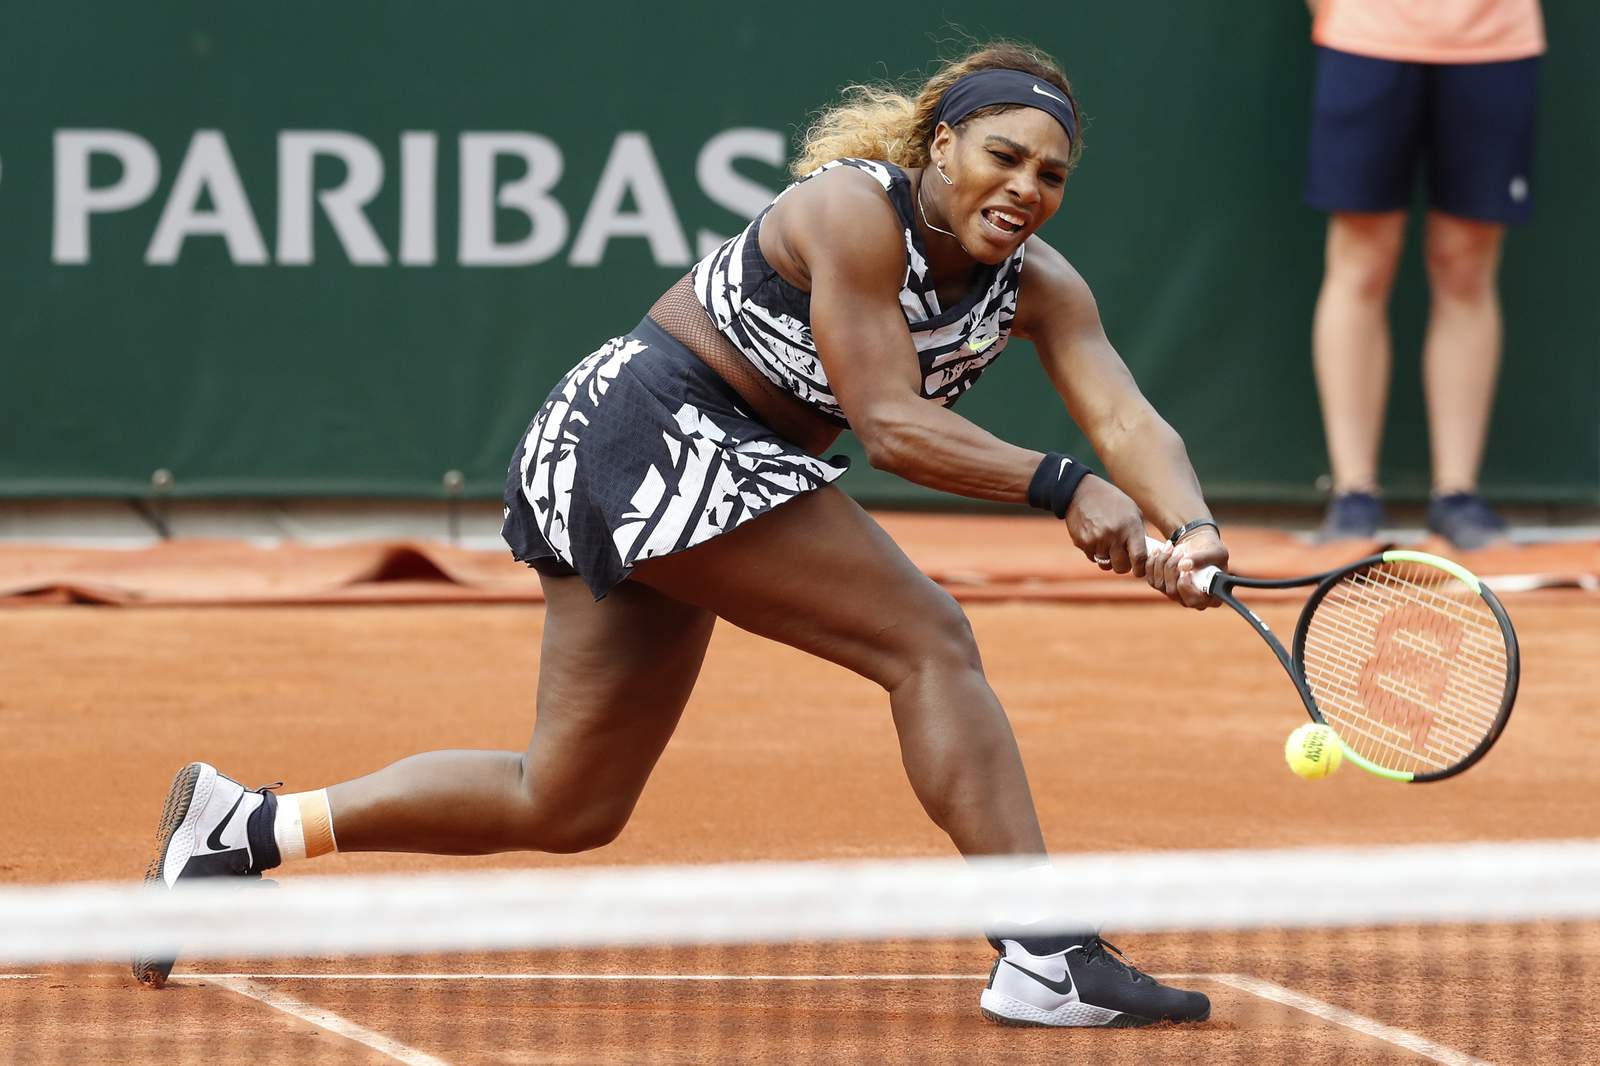 Serena Williams is fit and ready to play after 6-month break